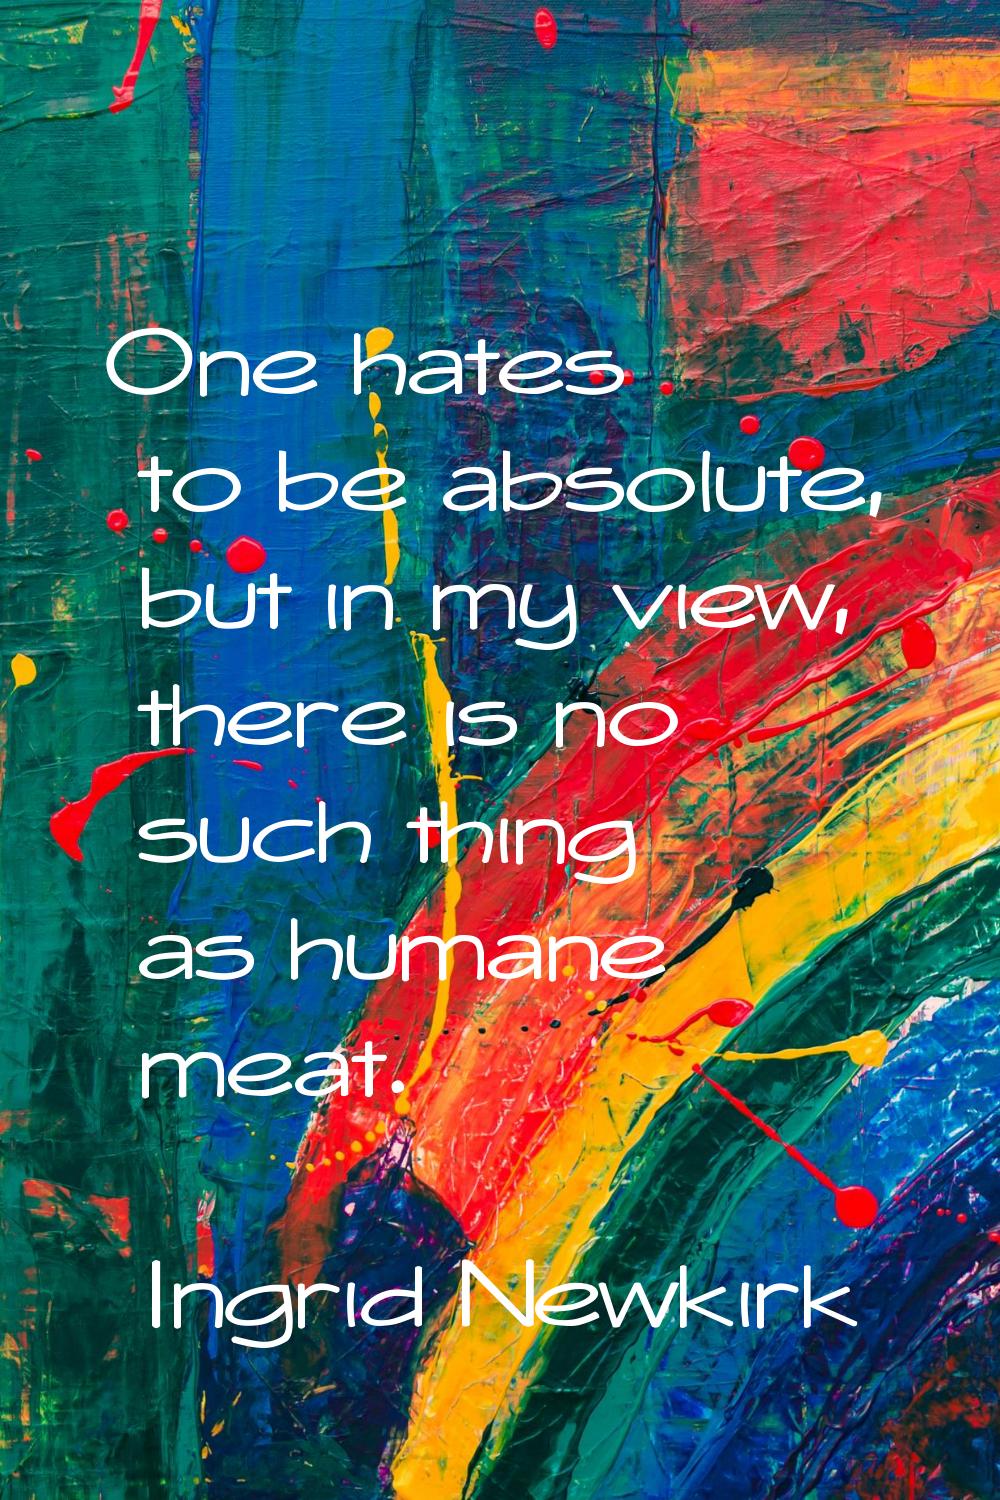 One hates to be absolute, but in my view, there is no such thing as humane meat.